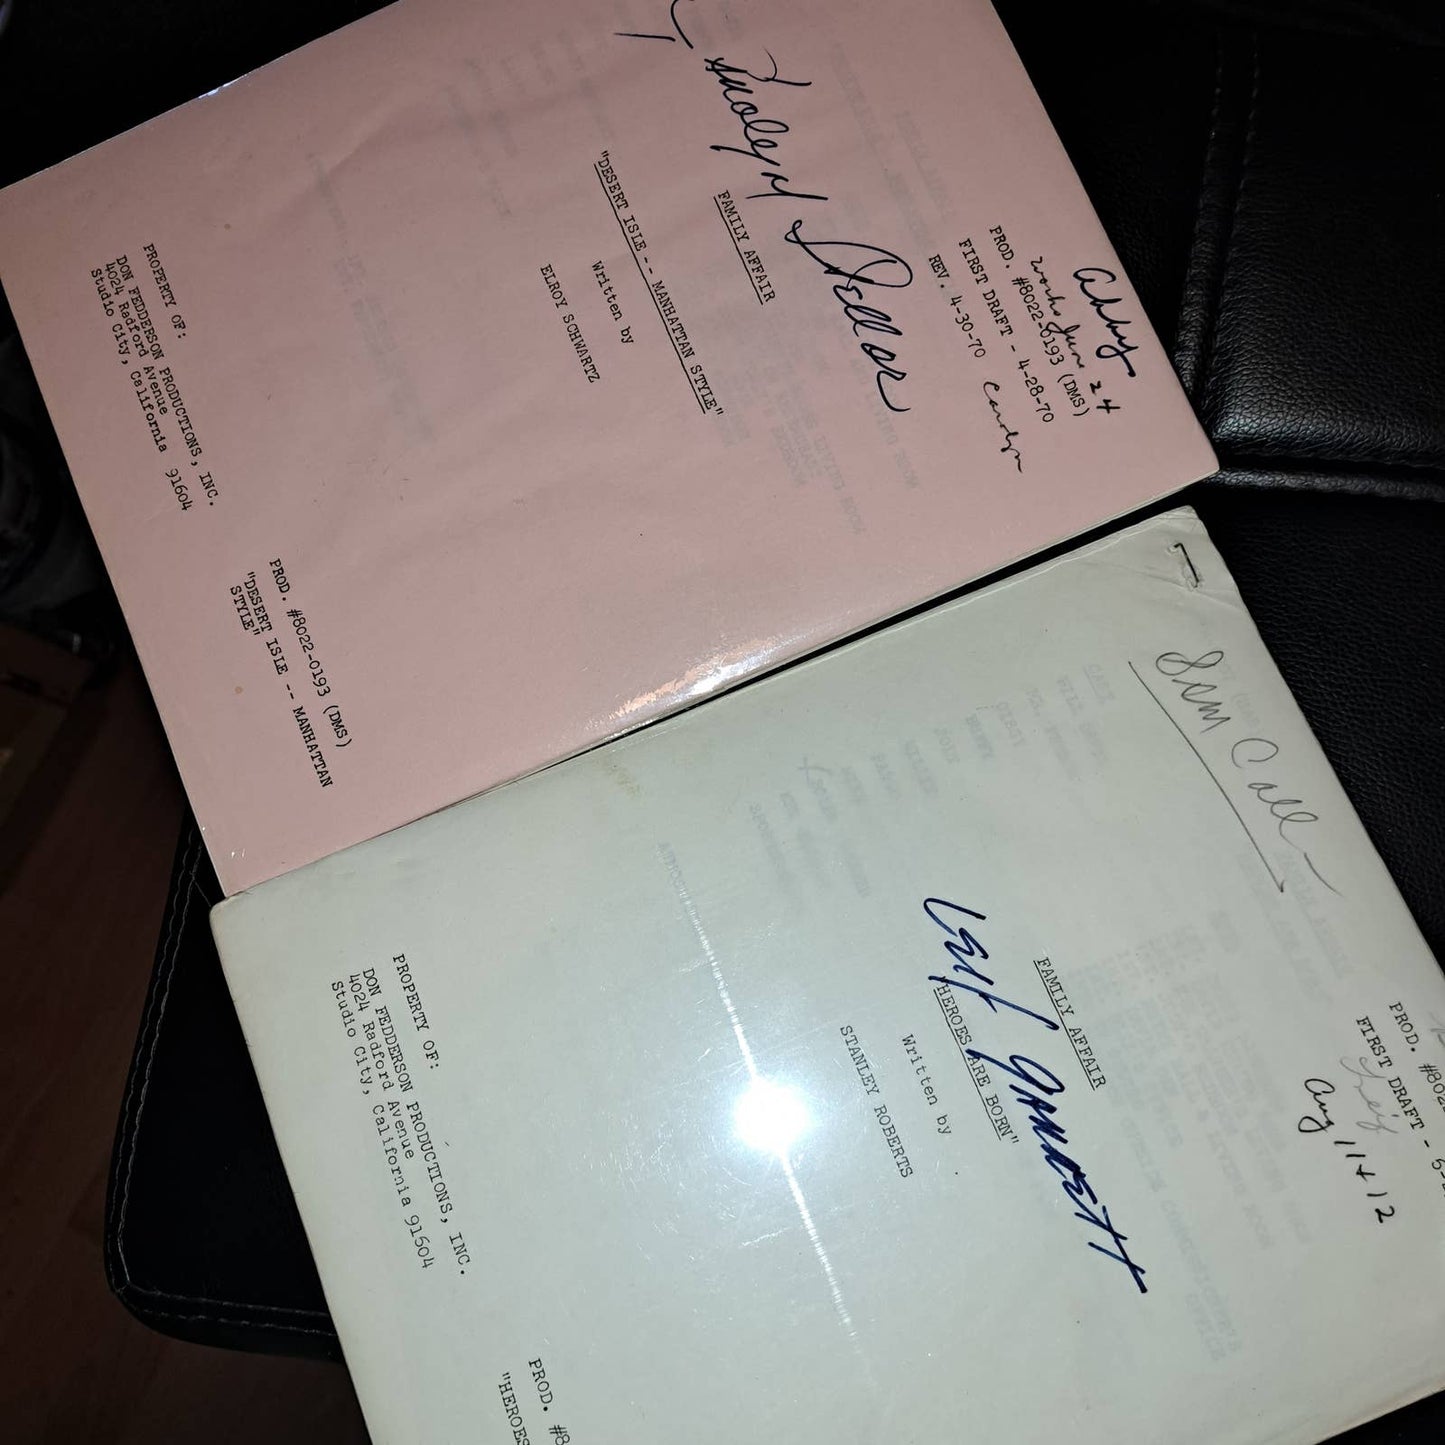 2 Well Preserved scripts from Family Affair -by Stanley Roberts & Elroy Schwartz